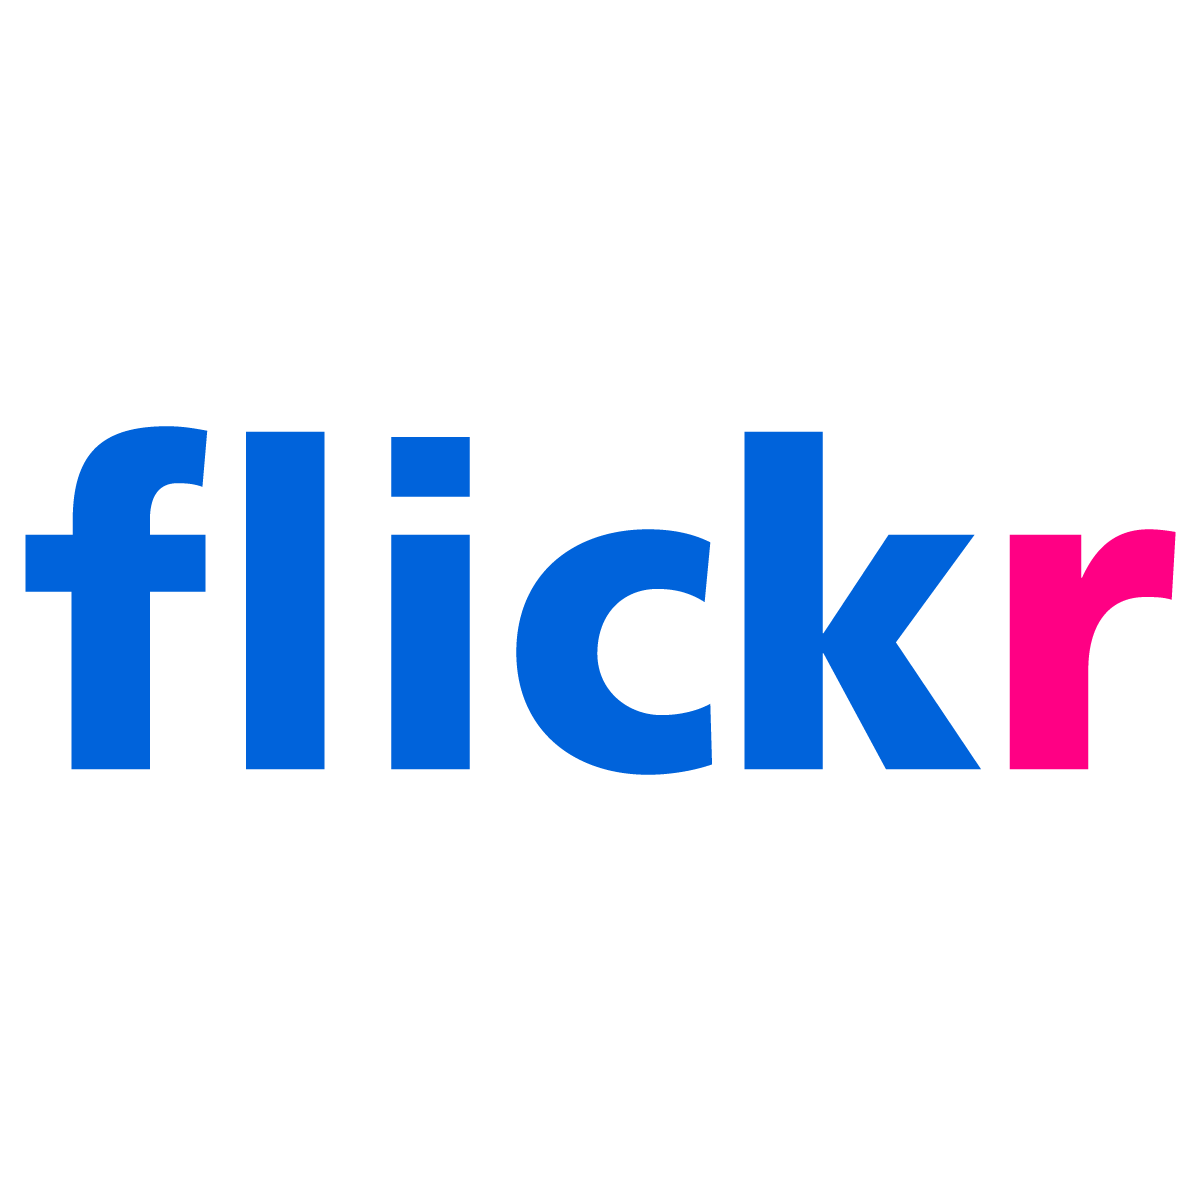 Flickr logo - Frutiger is a popular and flexible typeface - Image